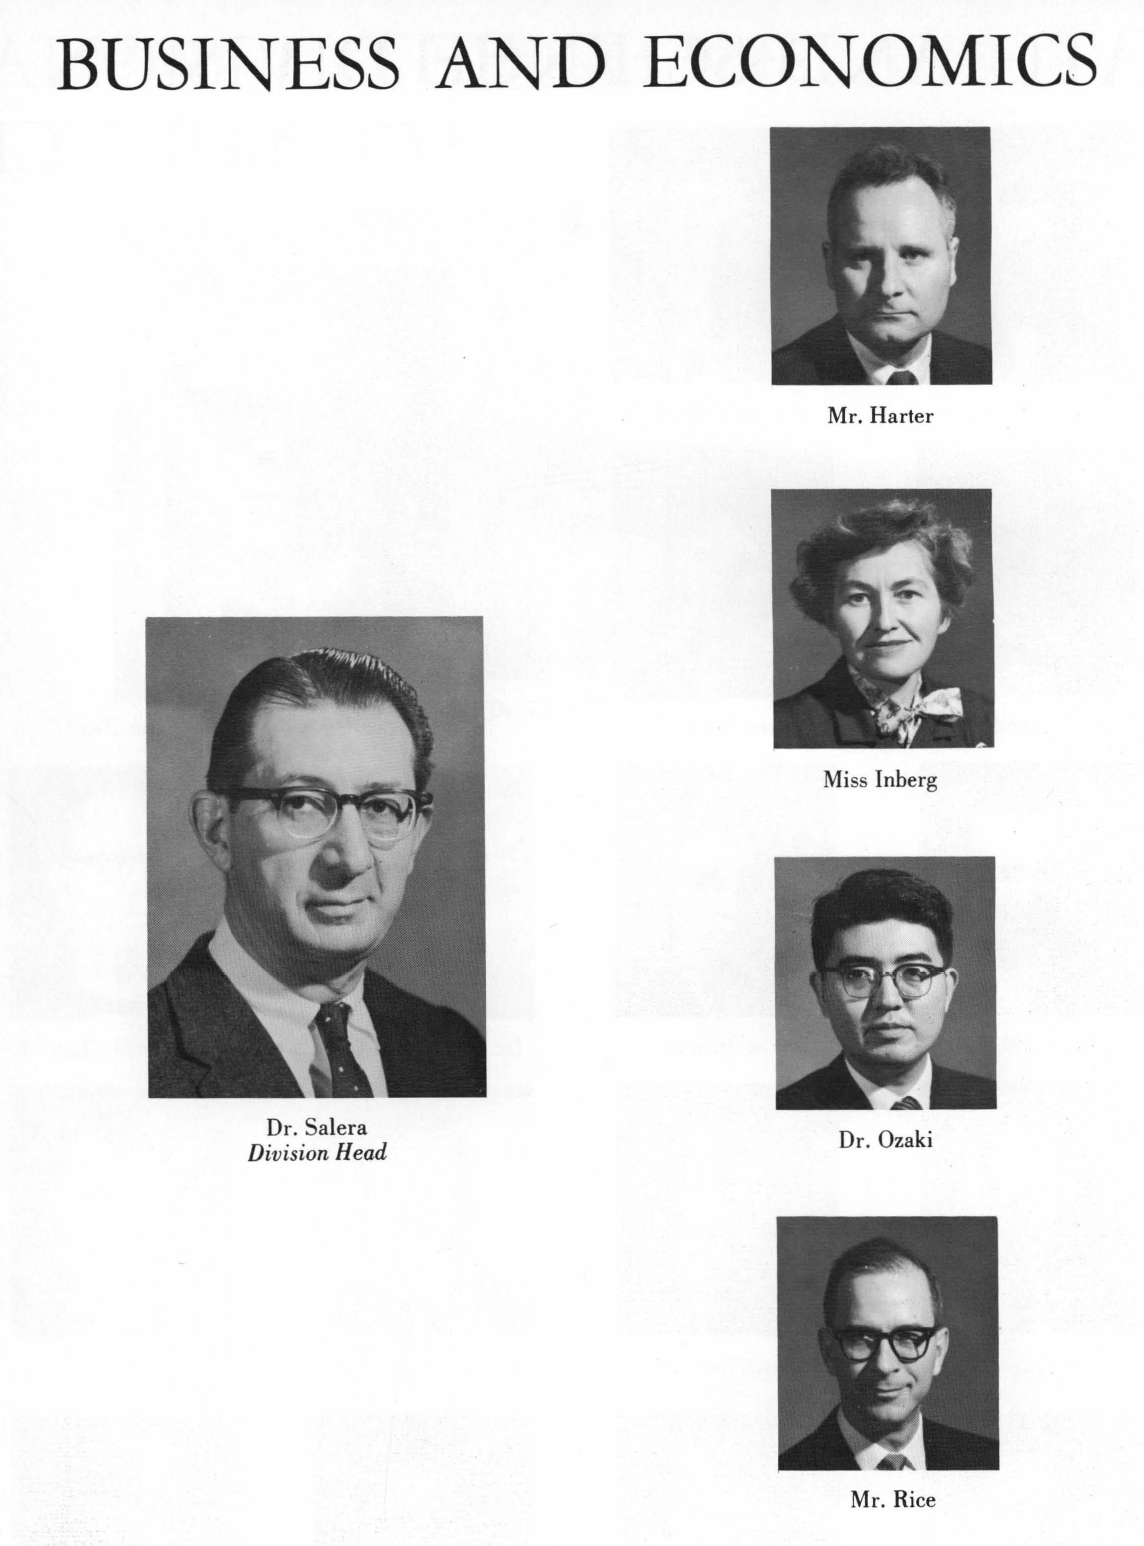 Faculty from 1964